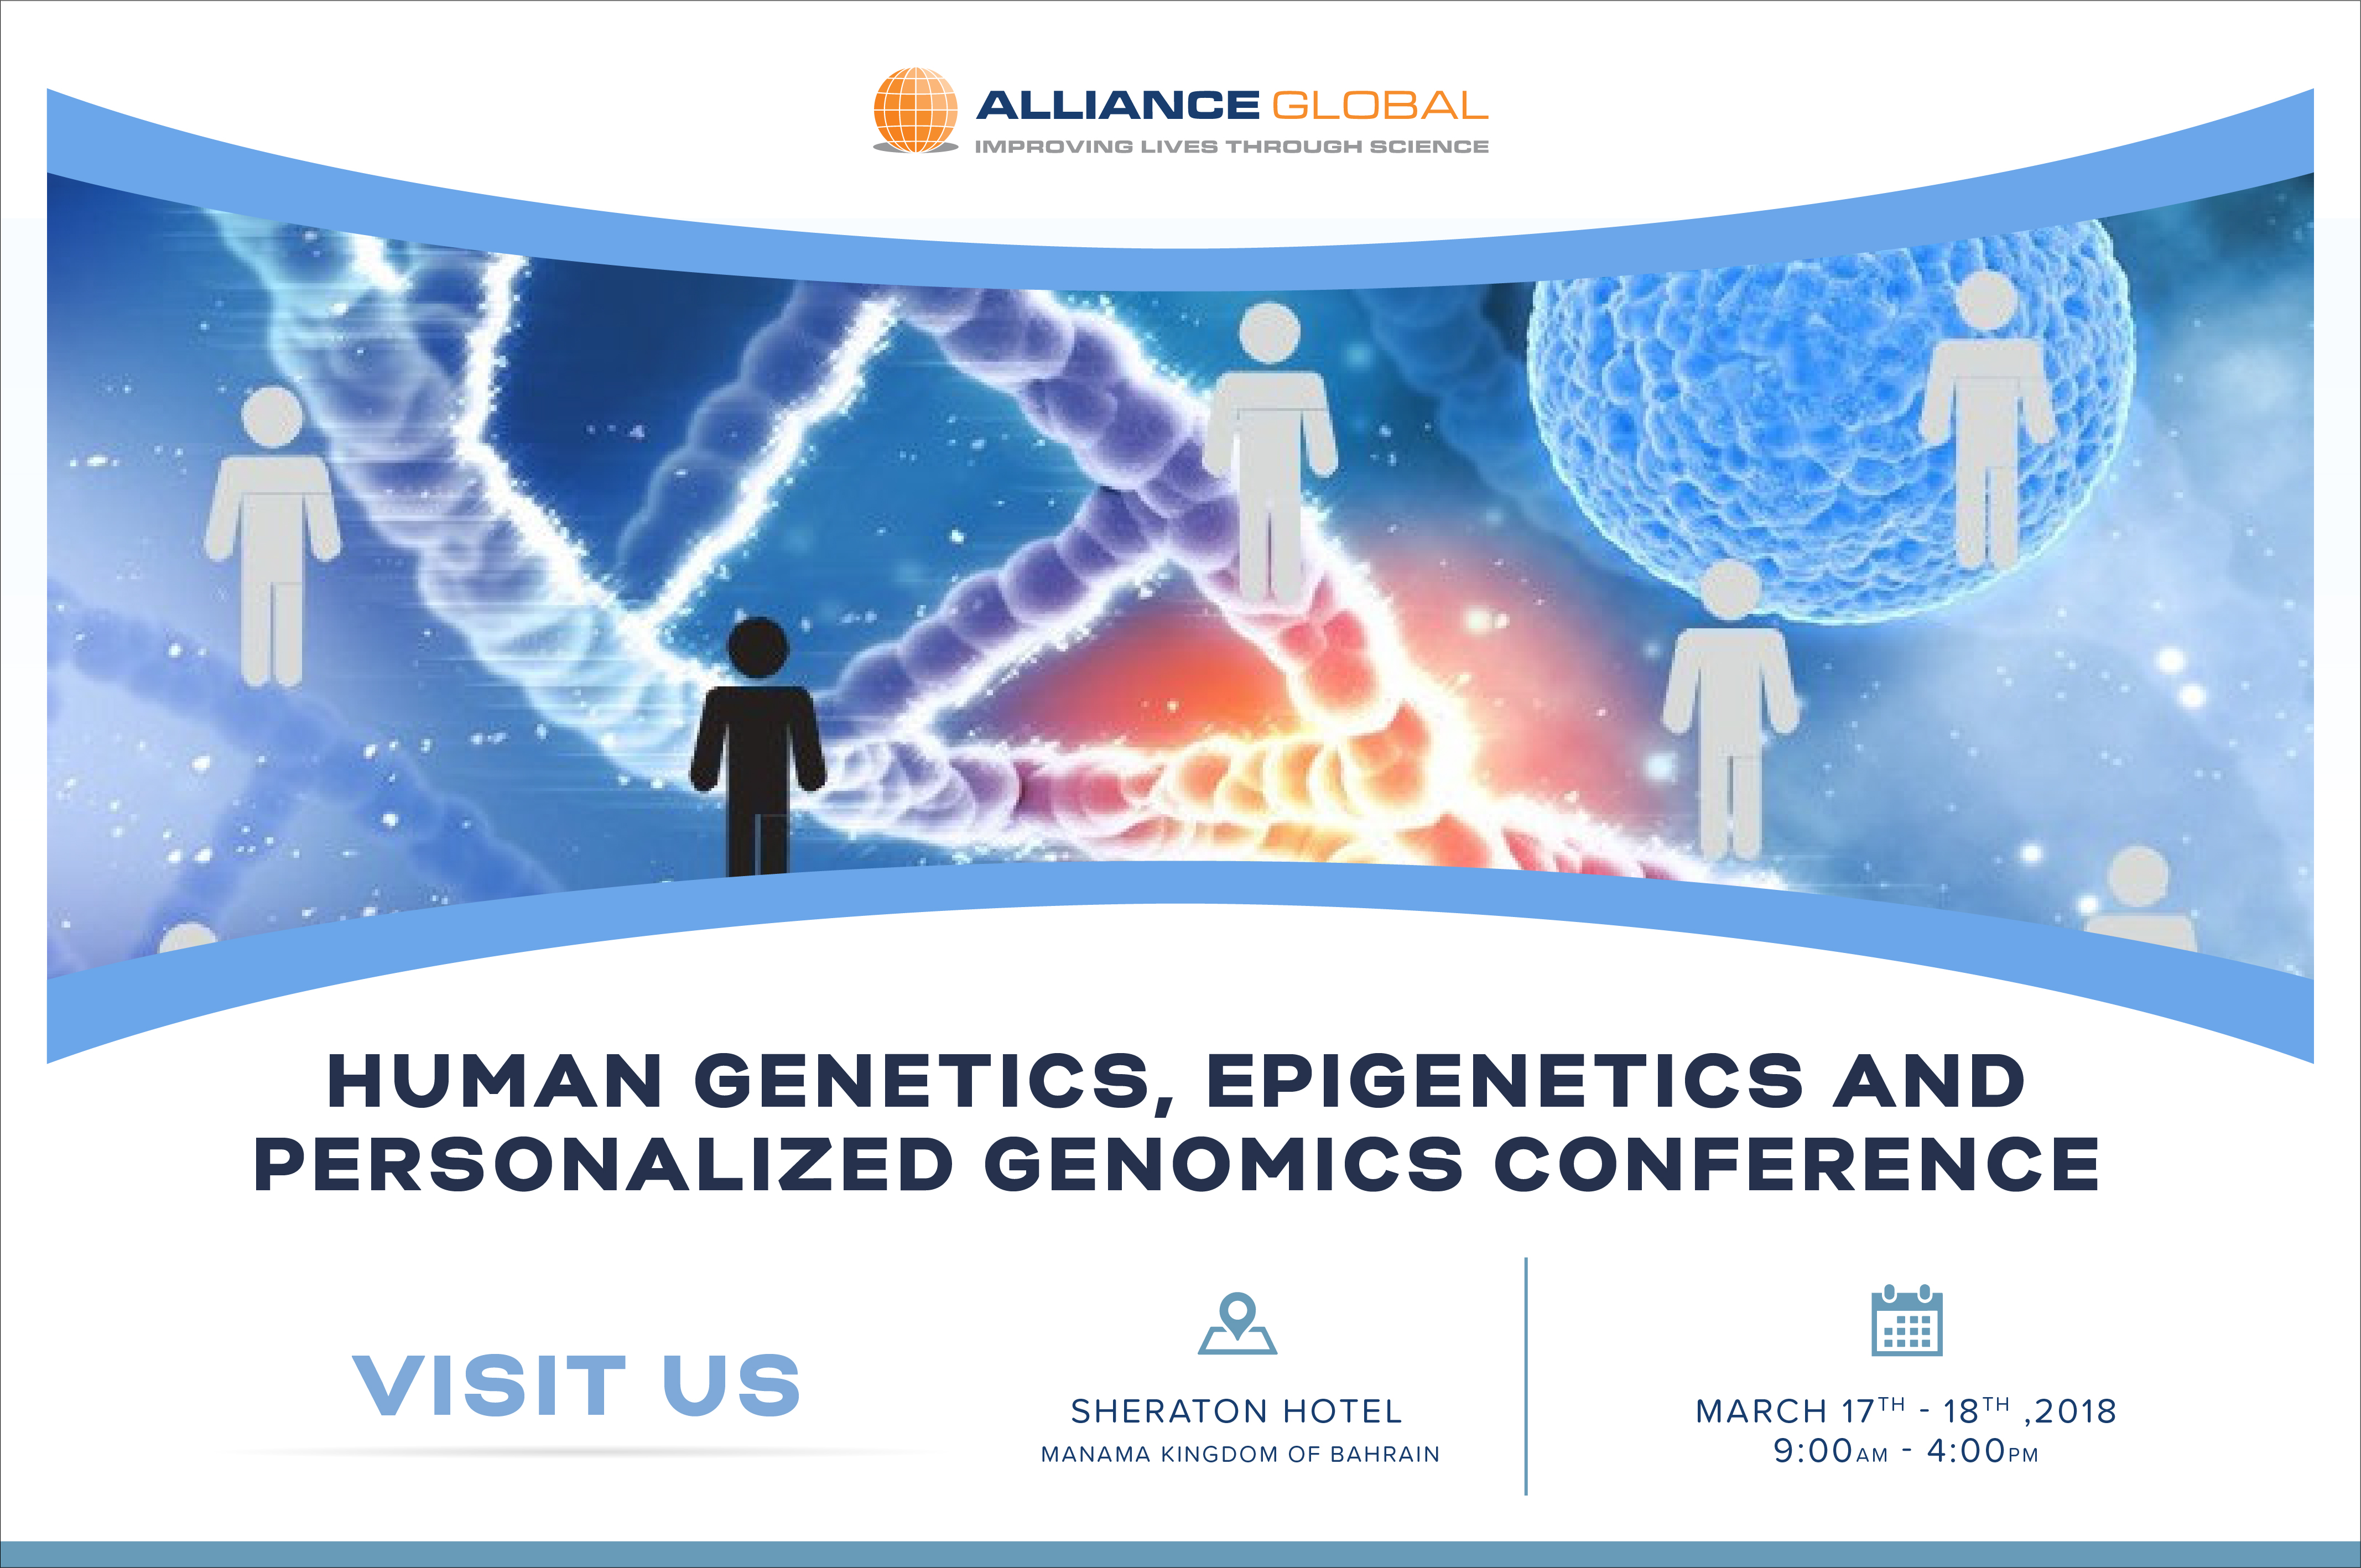 AGBL at Human Genetics, Personalized Genomics, and Epigenetics Conference, Bahrain